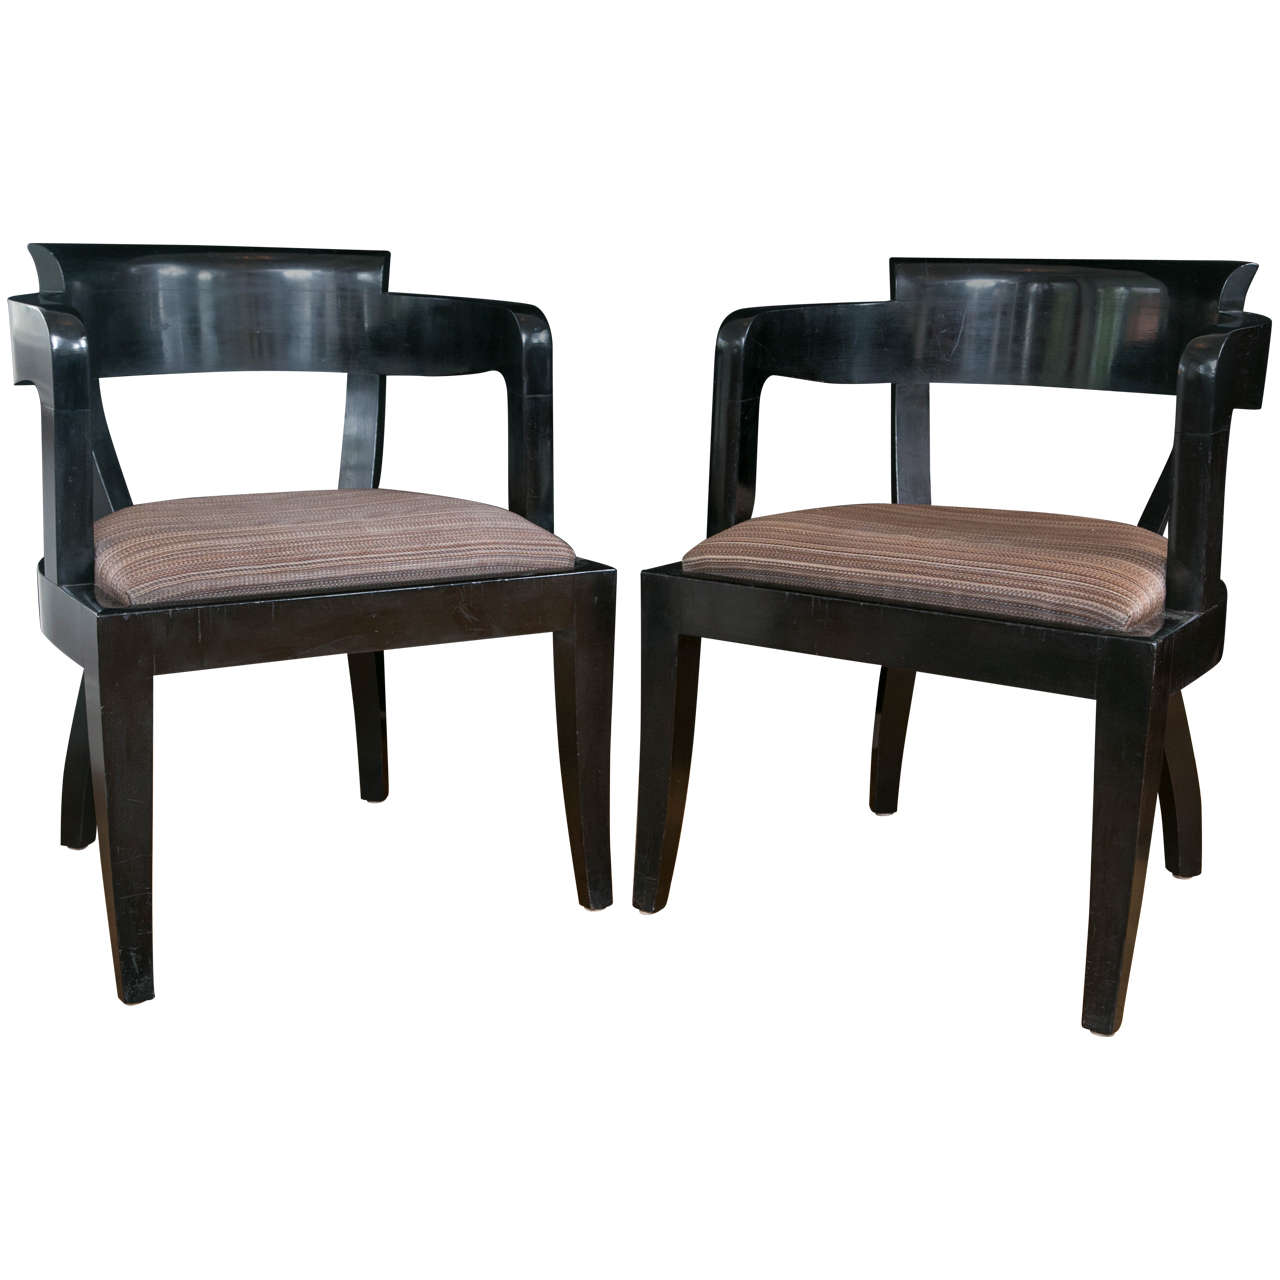 Set of Ten Modernist Black Lacquered Dining Chairs